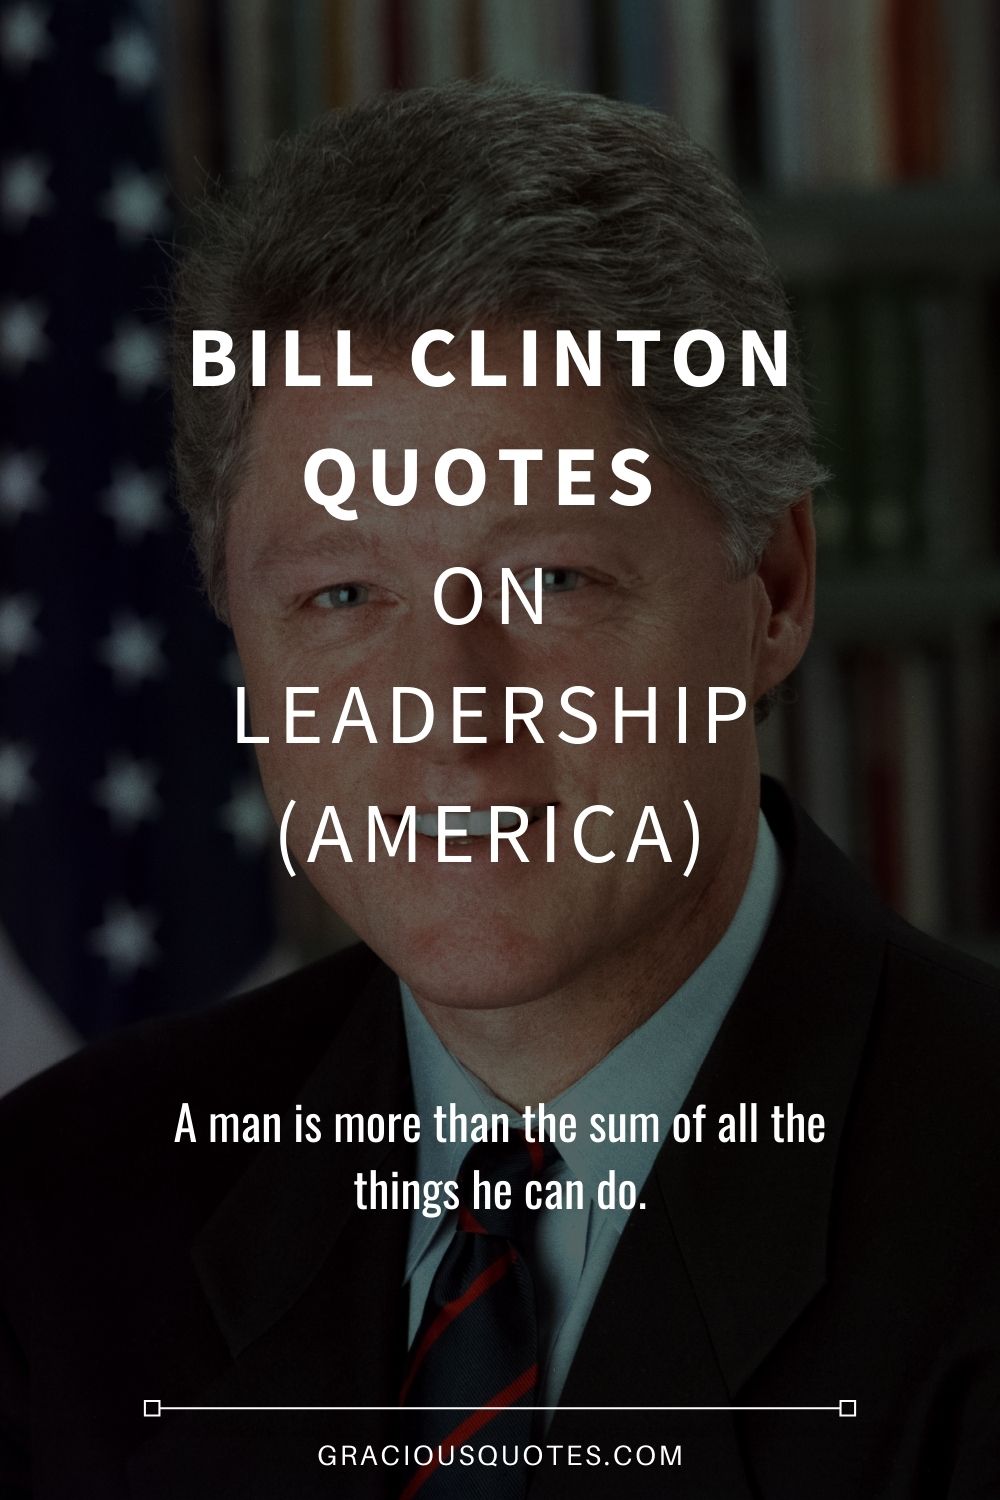 Bill Clinton Quotes on Leadership (AMERICA) - Gracious Quotes